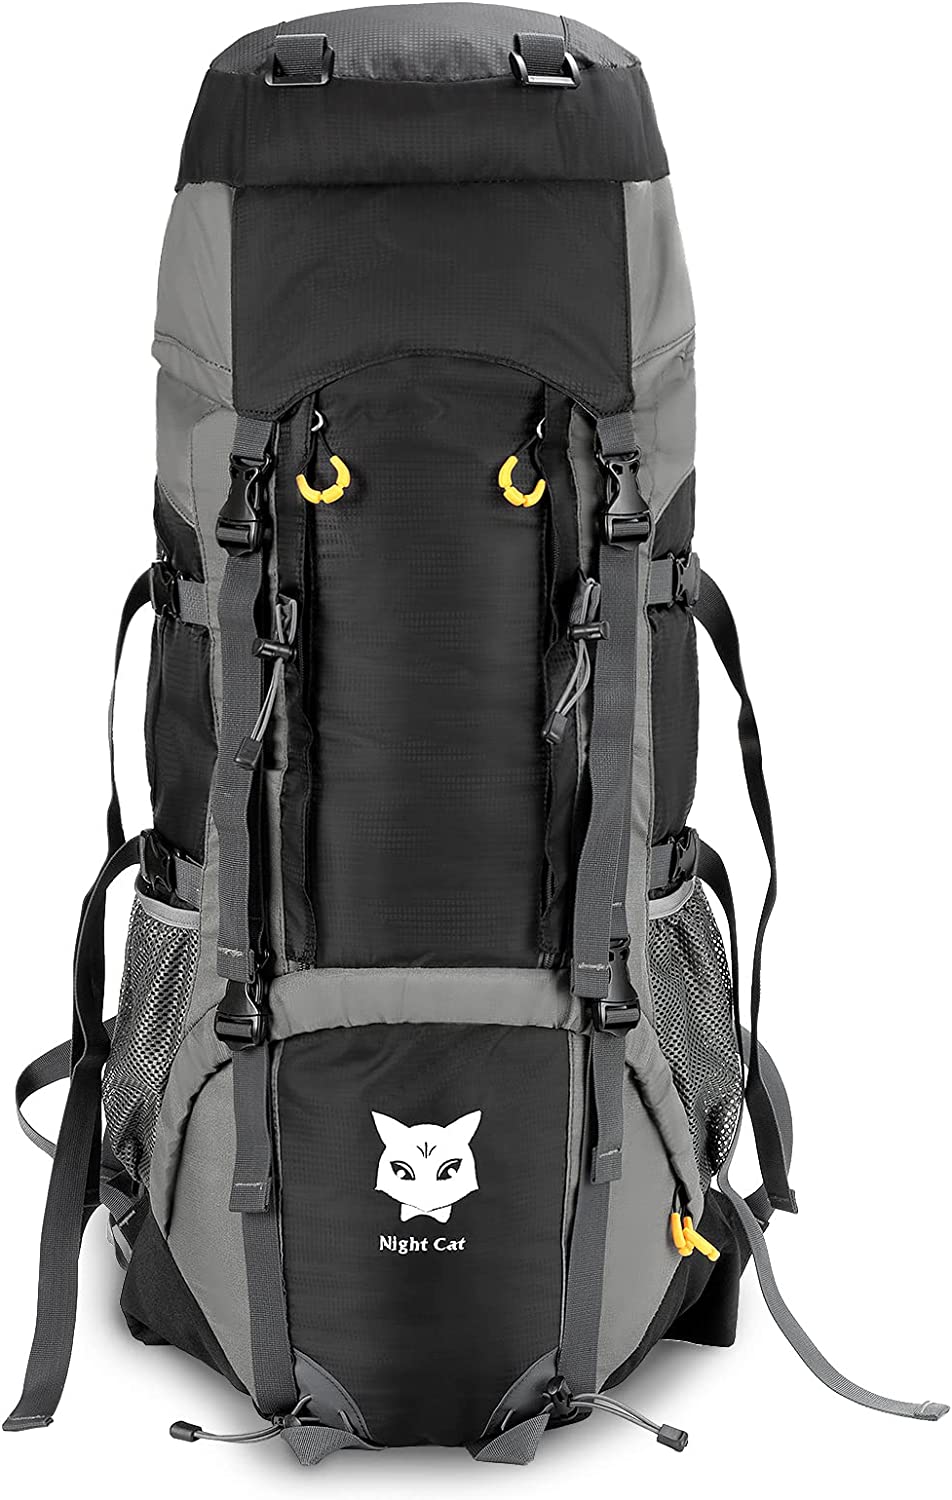 Night Cat Backpack 70L Hiking Lightweight Waterproof Rucksack Breathable for Trekking Mountaineering Camping Climbing Backpacking Cycling Traveling